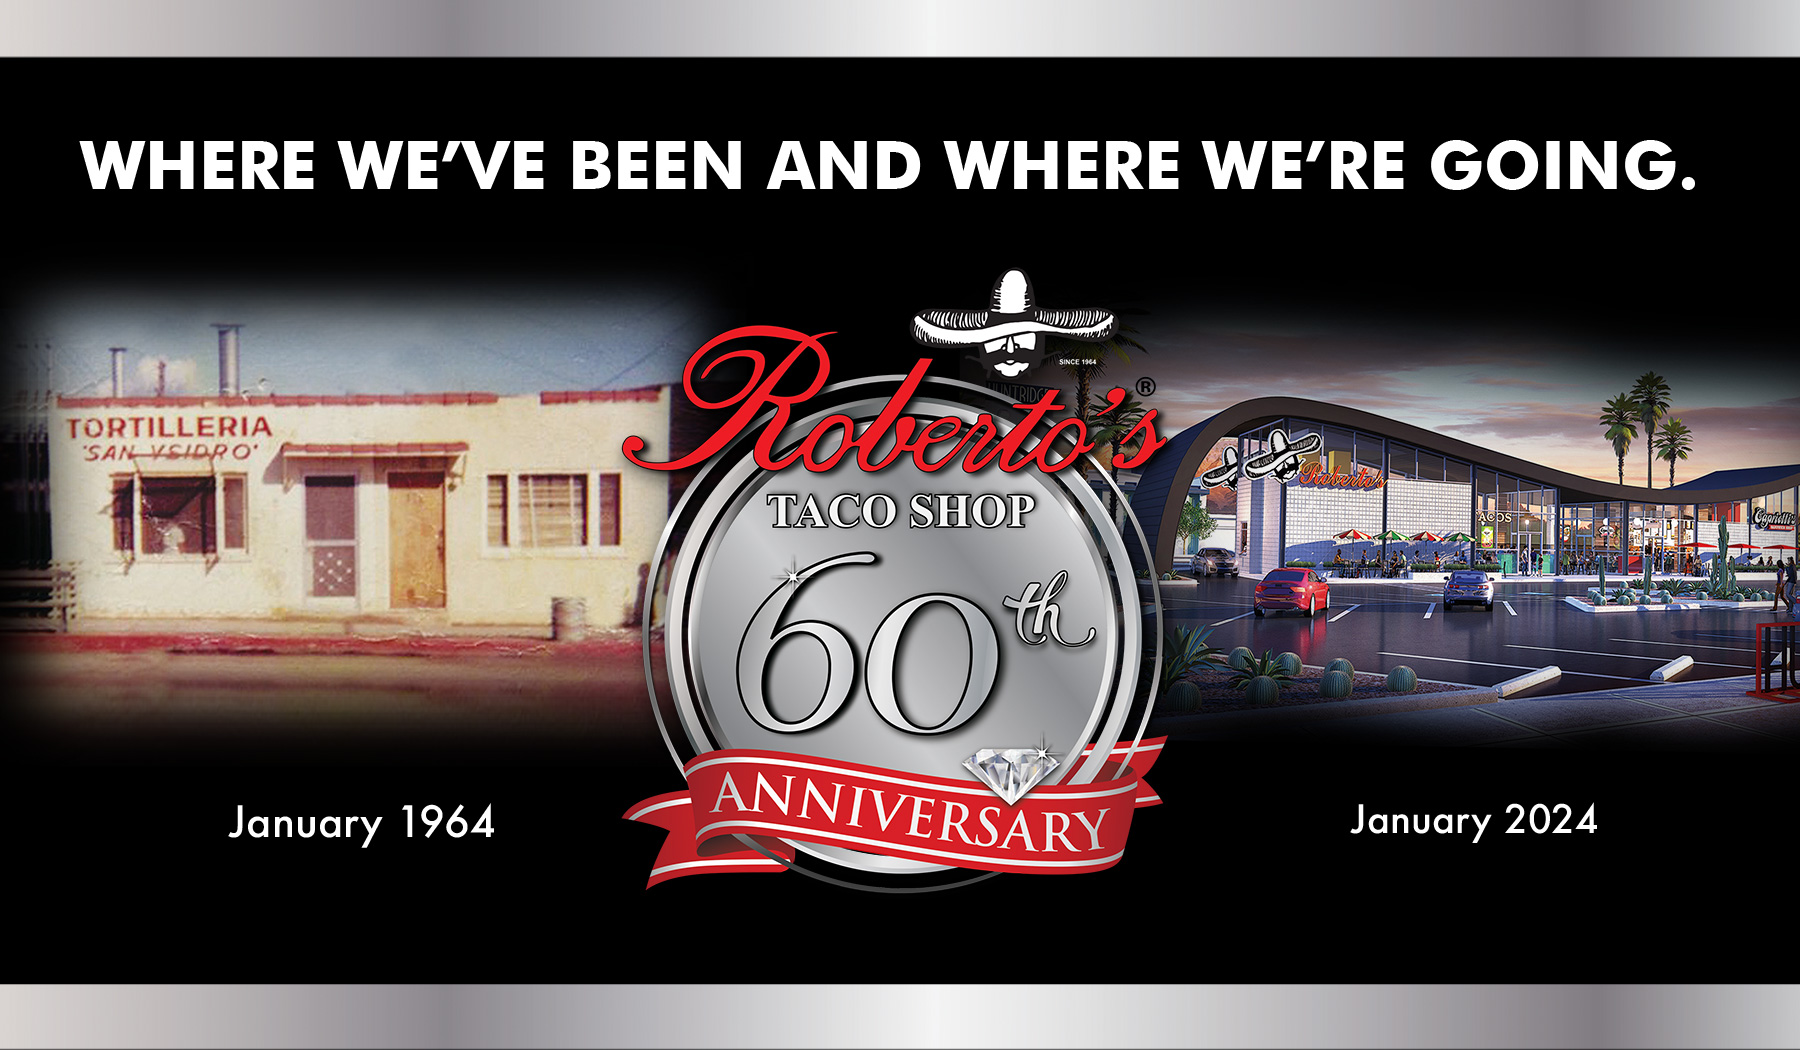 banner ad with the Roberto's Taco Shop logo and a caption that says Where We've Been and Where We're Going